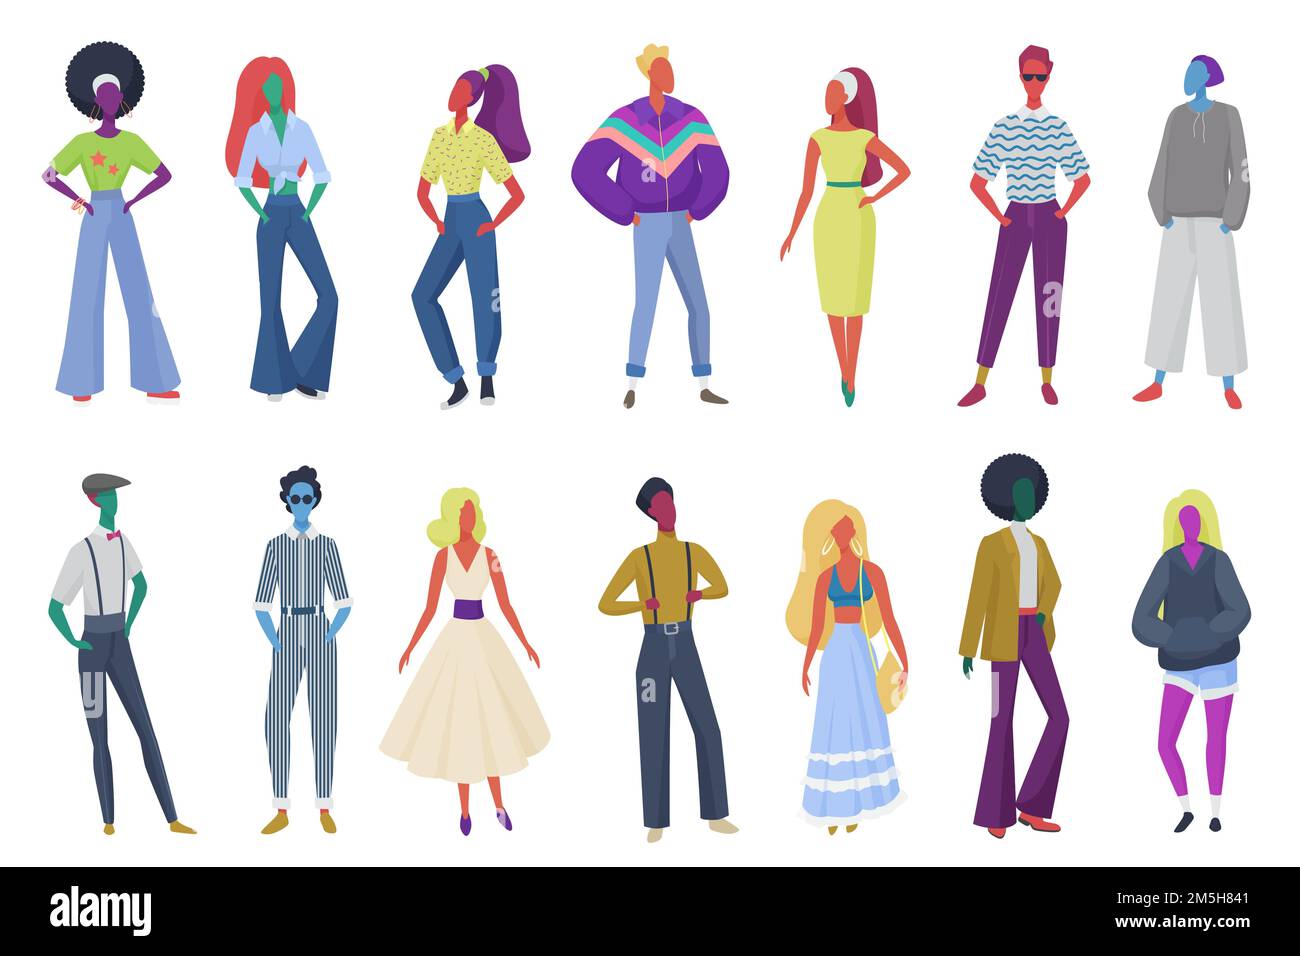 https://c8.alamy.com/comp/2M5H841/group-of-minimalistic-abstract-retro-fashion-people-wearing-vintage-clothes-men-and-women-in-60s-70s-80s-style-clothing-at-retro-disco-party-vector-2M5H841.jpg